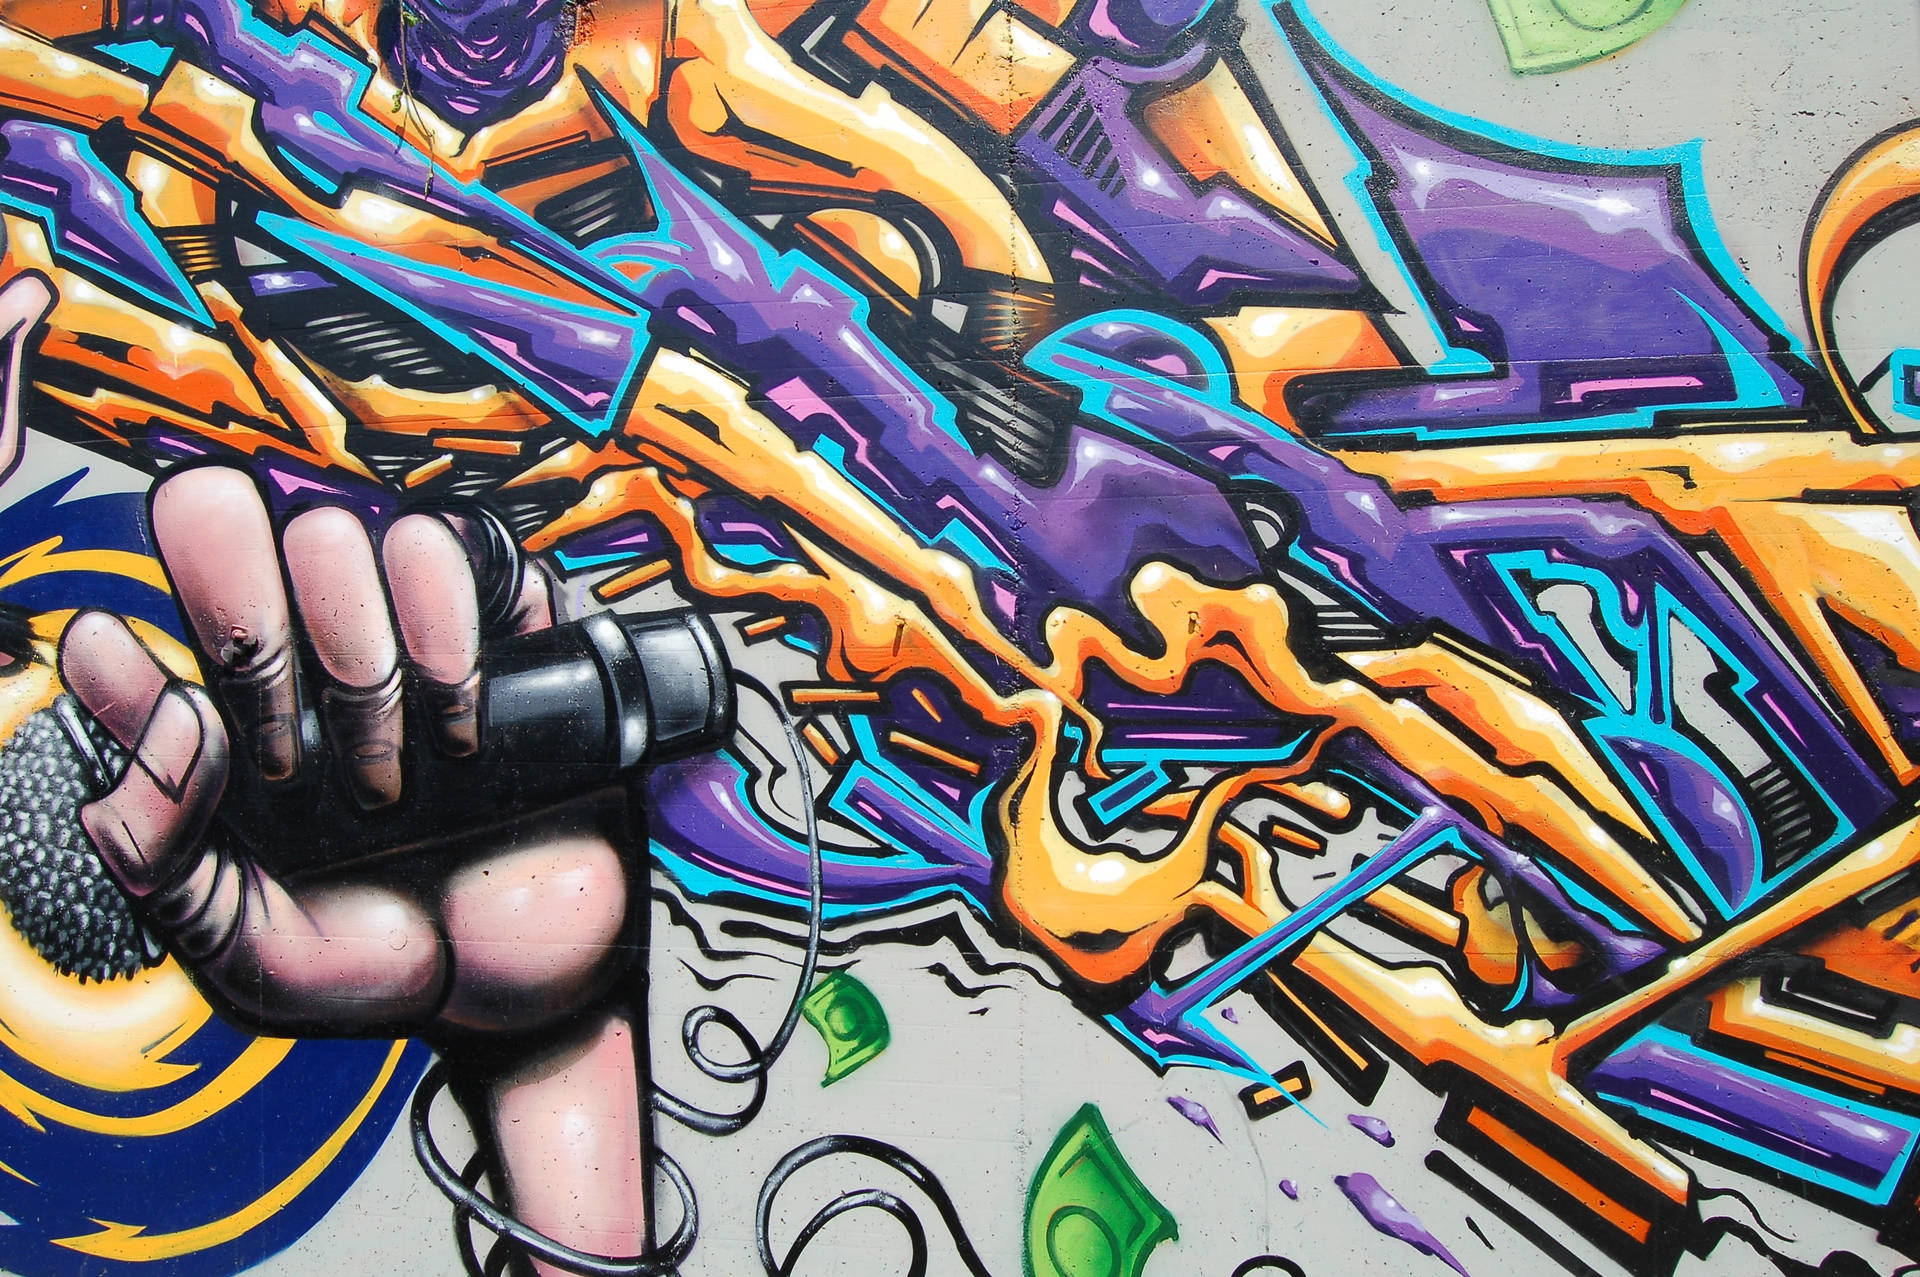 Adding The Finishing Touches To A Vibrant Music-inspired Graffiti Mural. Background